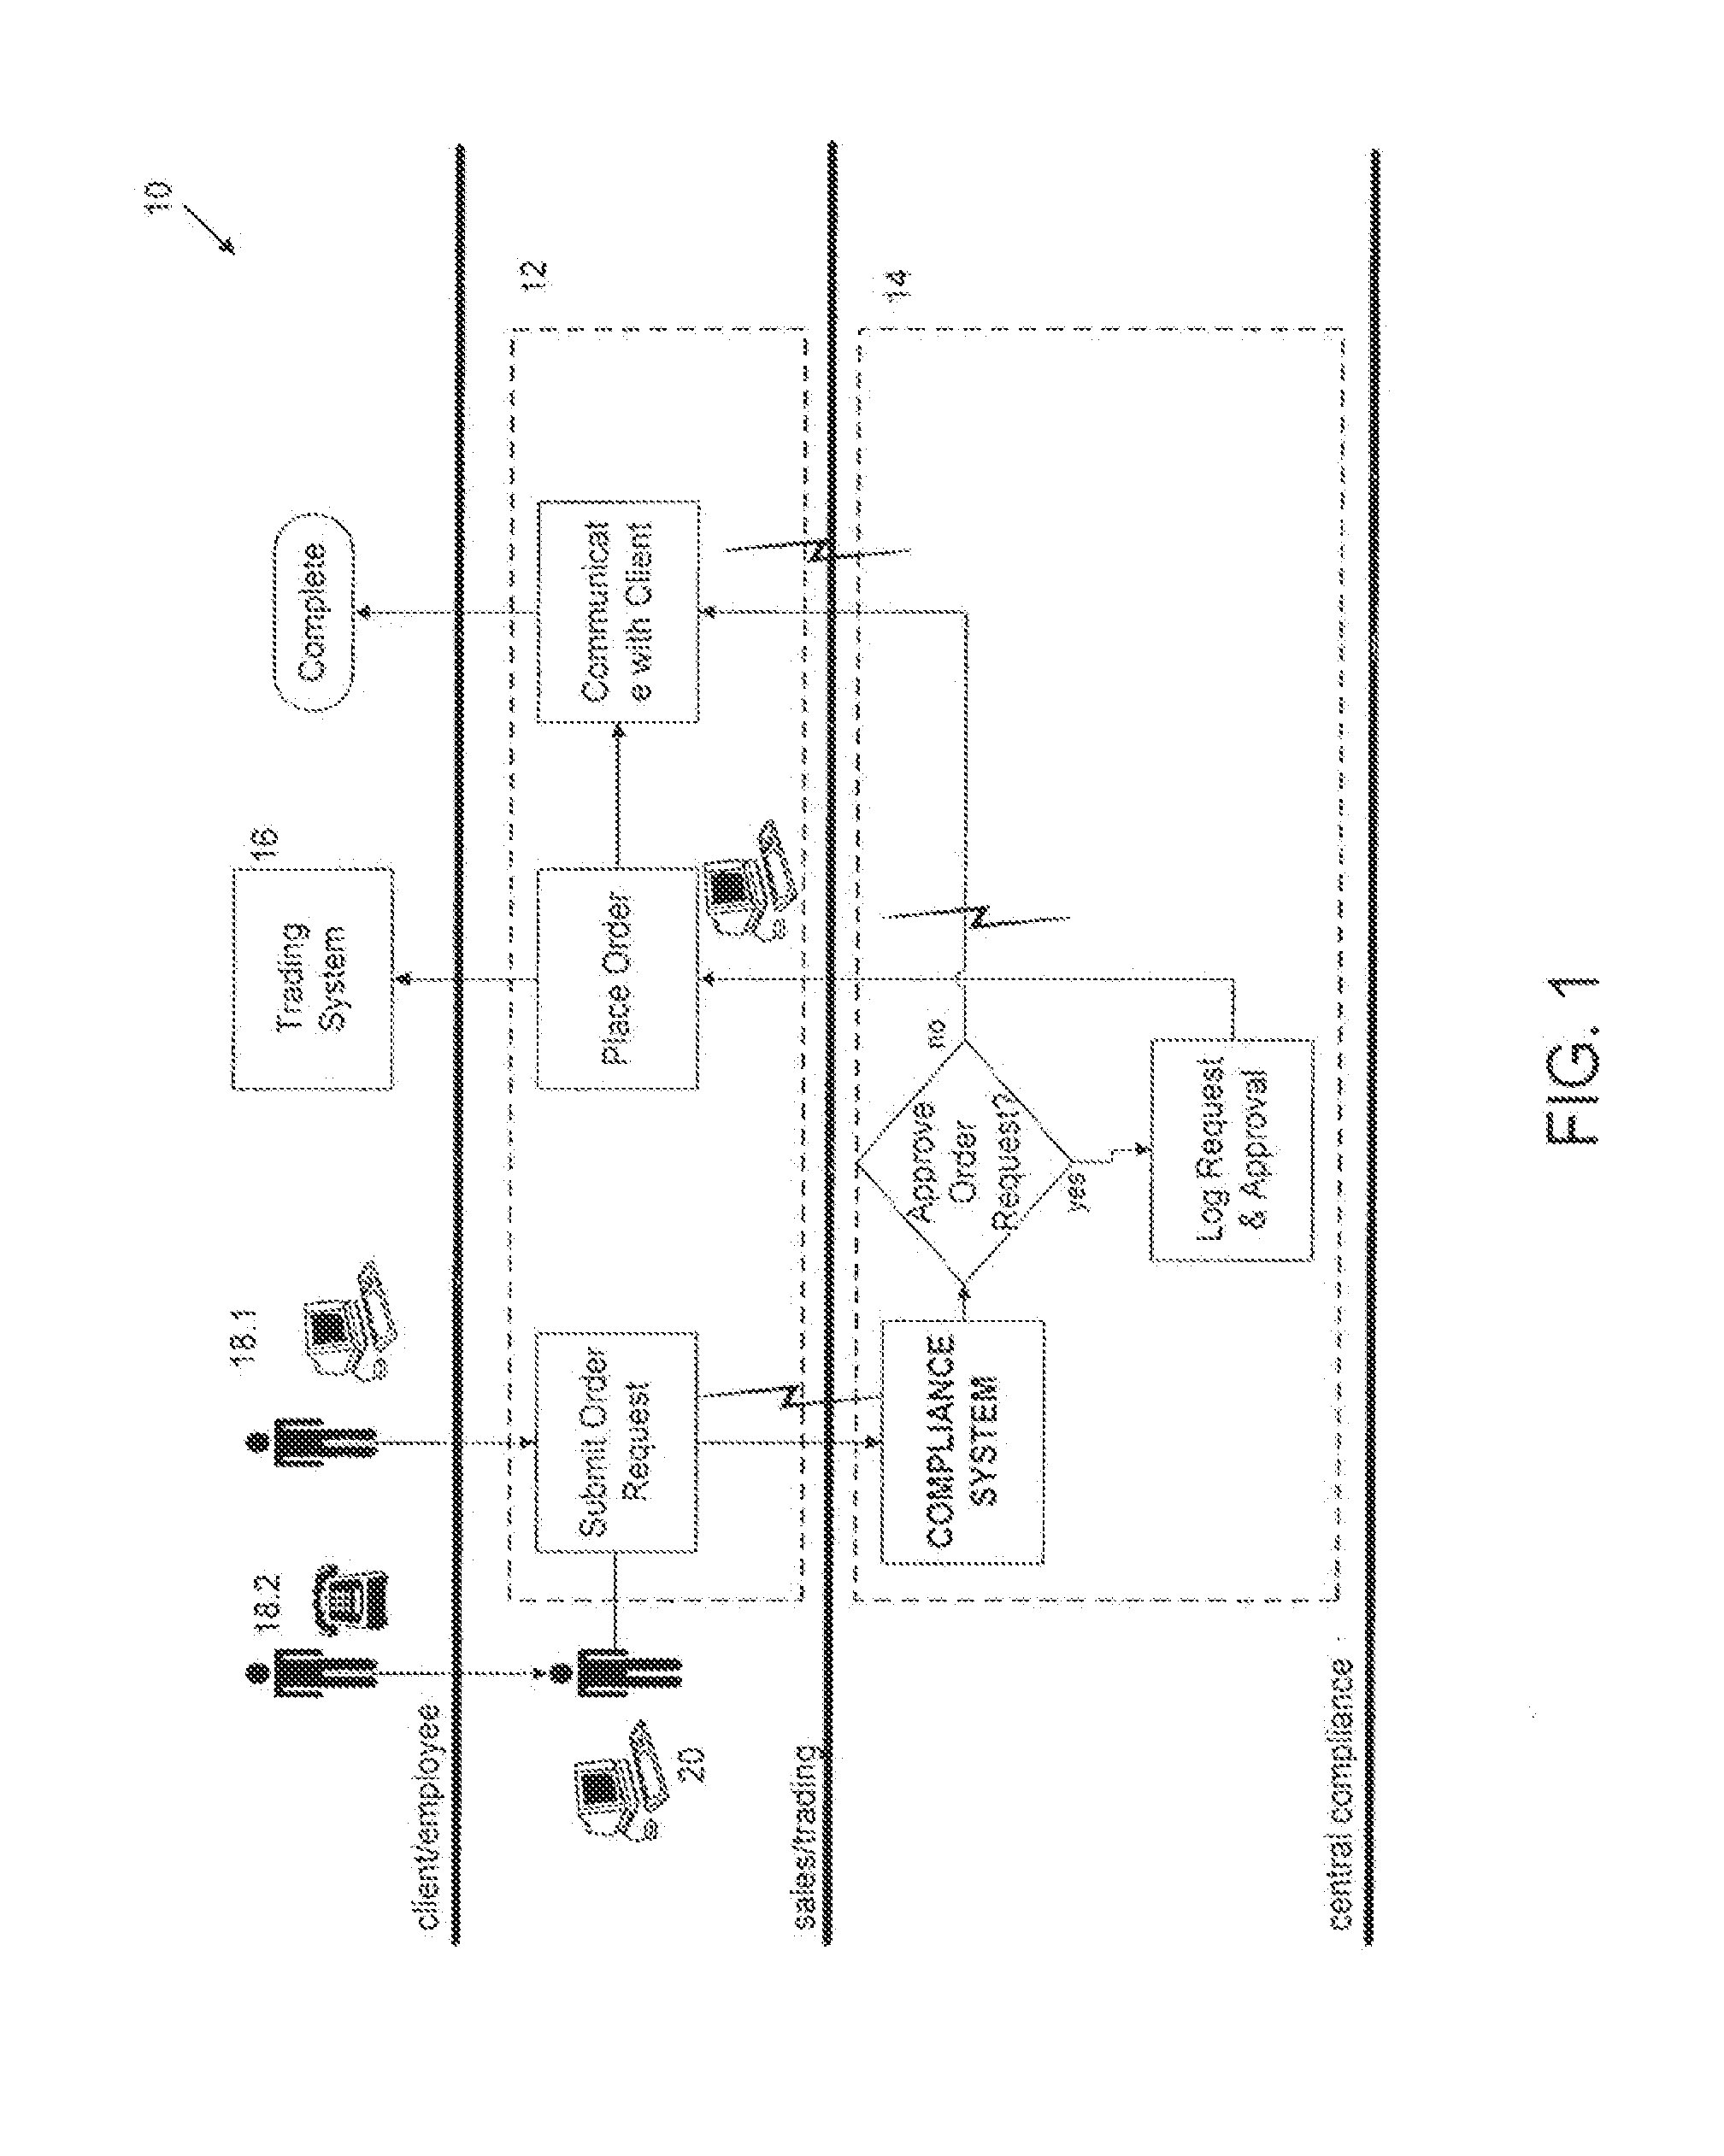 Method and system for automated transaction compliance processing